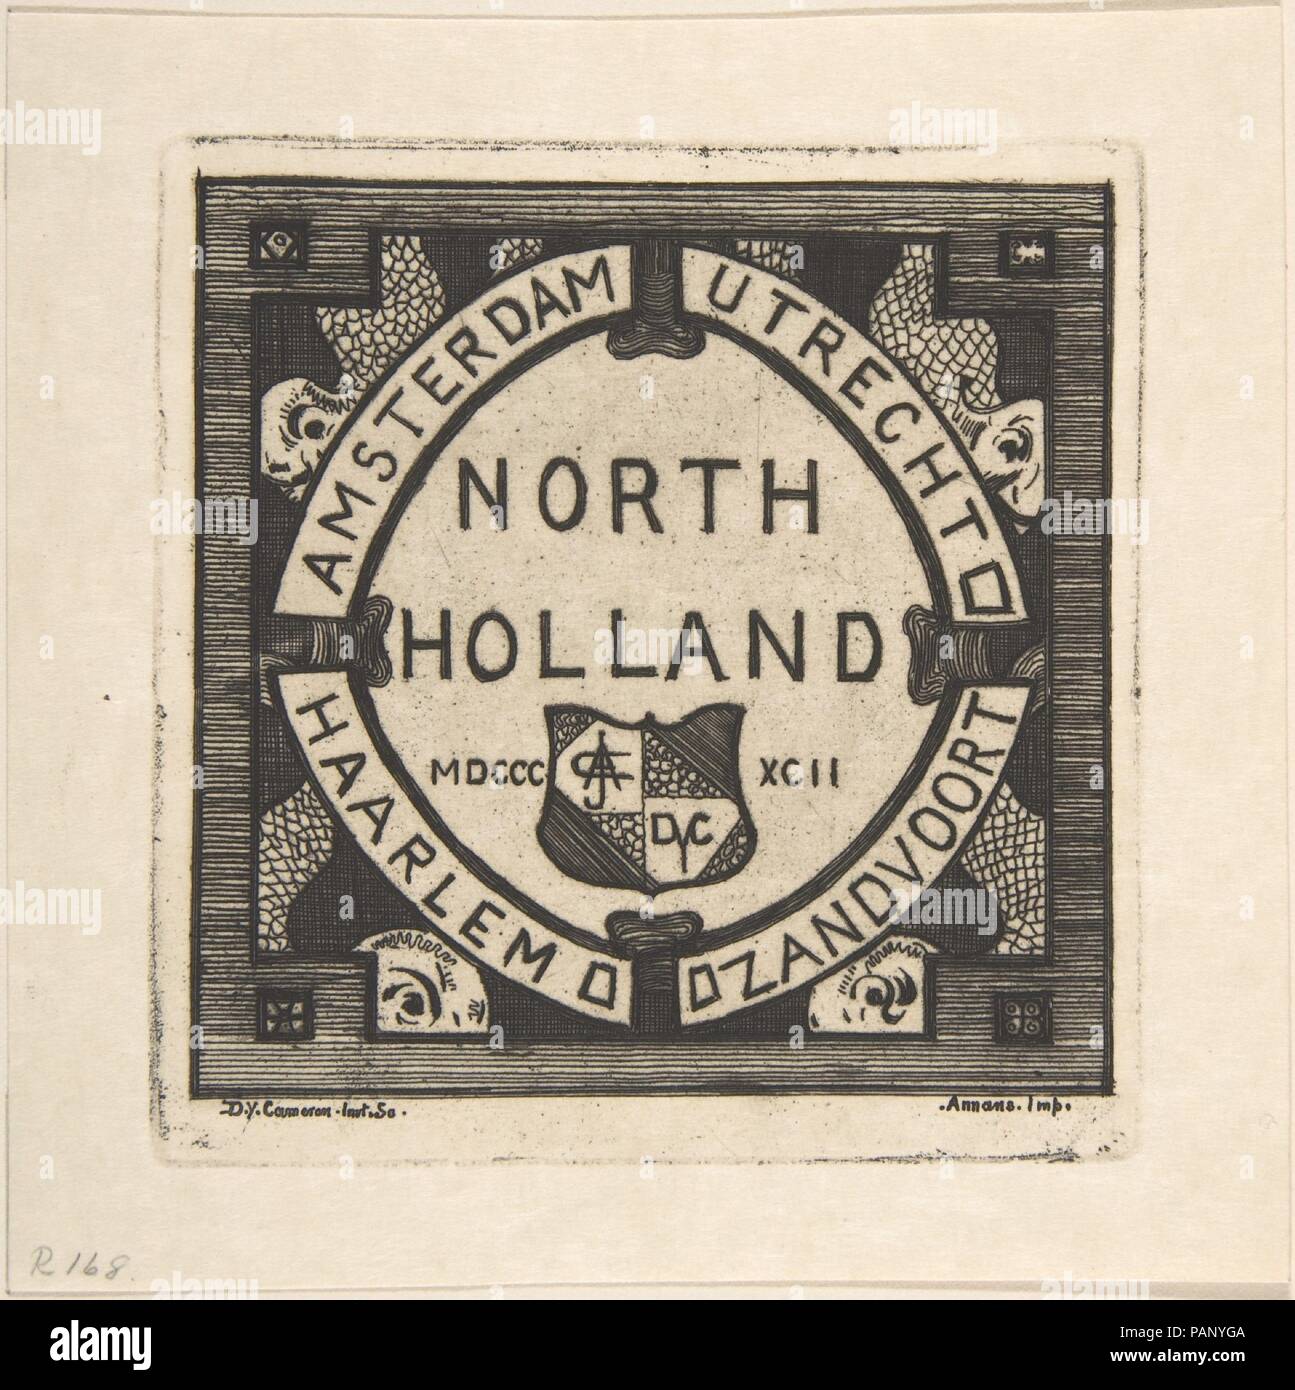 Catalogue Cover of Annan's Exhibition of the North Holland Set. Artist: Sir David Young Cameron (British, Glasgow, Scotland 1865-1945 Perth, Scotland). Dimensions: Plate: 4 1/16 x 3 7/8 in. (10.3 x 9.9 cm)  Sheet: 5 x 4 13/16 in. (12.7 x 12.3 cm). Printer: T. & R. Annan. Series/Portfolio: North Holland Set. Date: 1892.  A catalogue cover for an exhibition in Glasgow at Messrs. T. & R. Annan & Sons of D.Y. Cameron's series of etchings of North Holland.   The North Holland Set is comprised of twenty-two subjects etched and printed by D.Y. Cameron. There were ten complete sets and a few seperate  Stock Photo